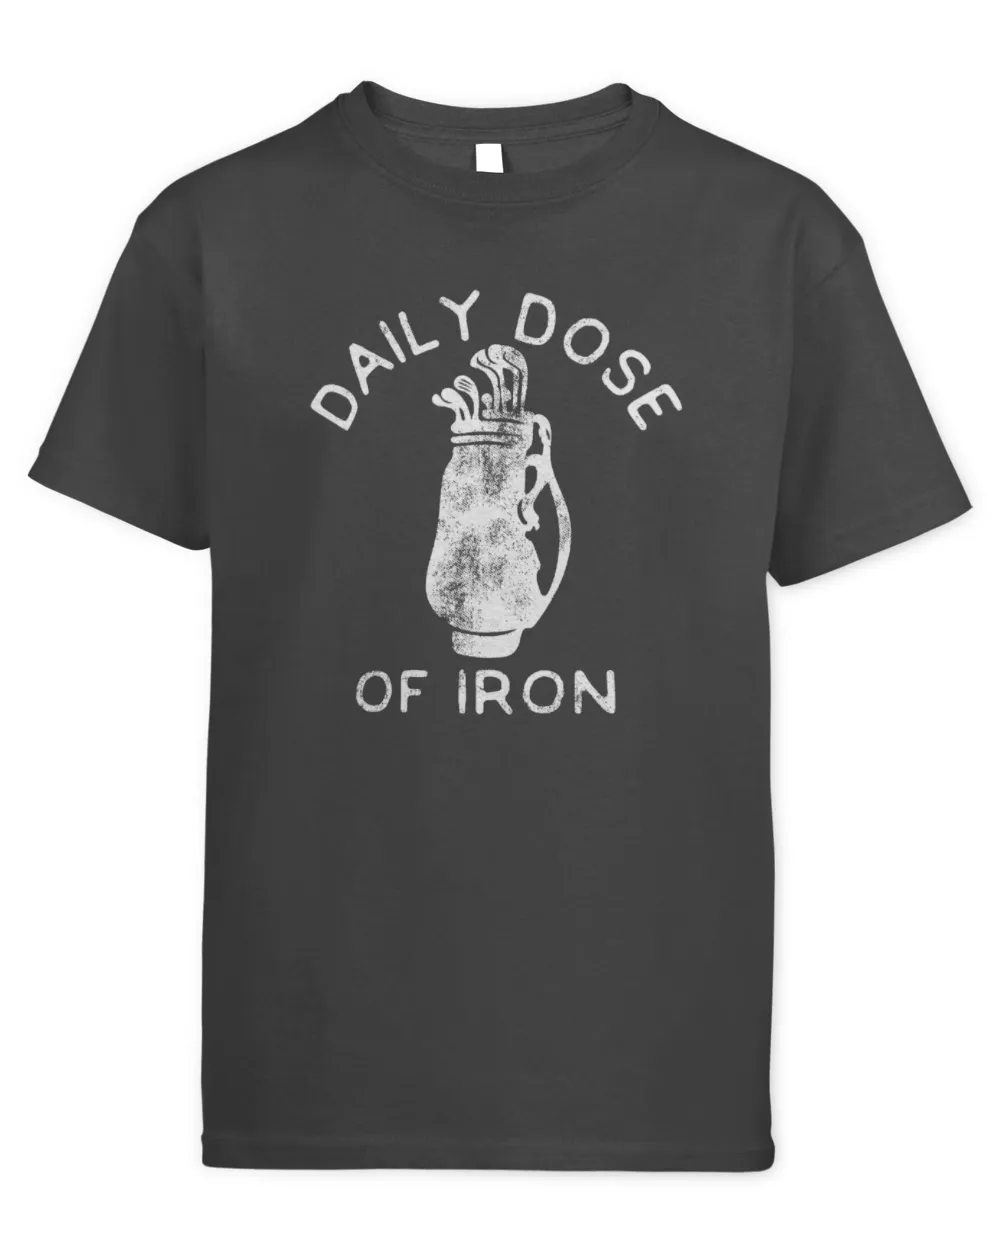 Funny Joke Golf Shirt, Golfing T Shirt Men, Dad Golfer Humor, Funny Shirts, Rude Offensive Gifts For Golfers, Daily Dose Of Iron